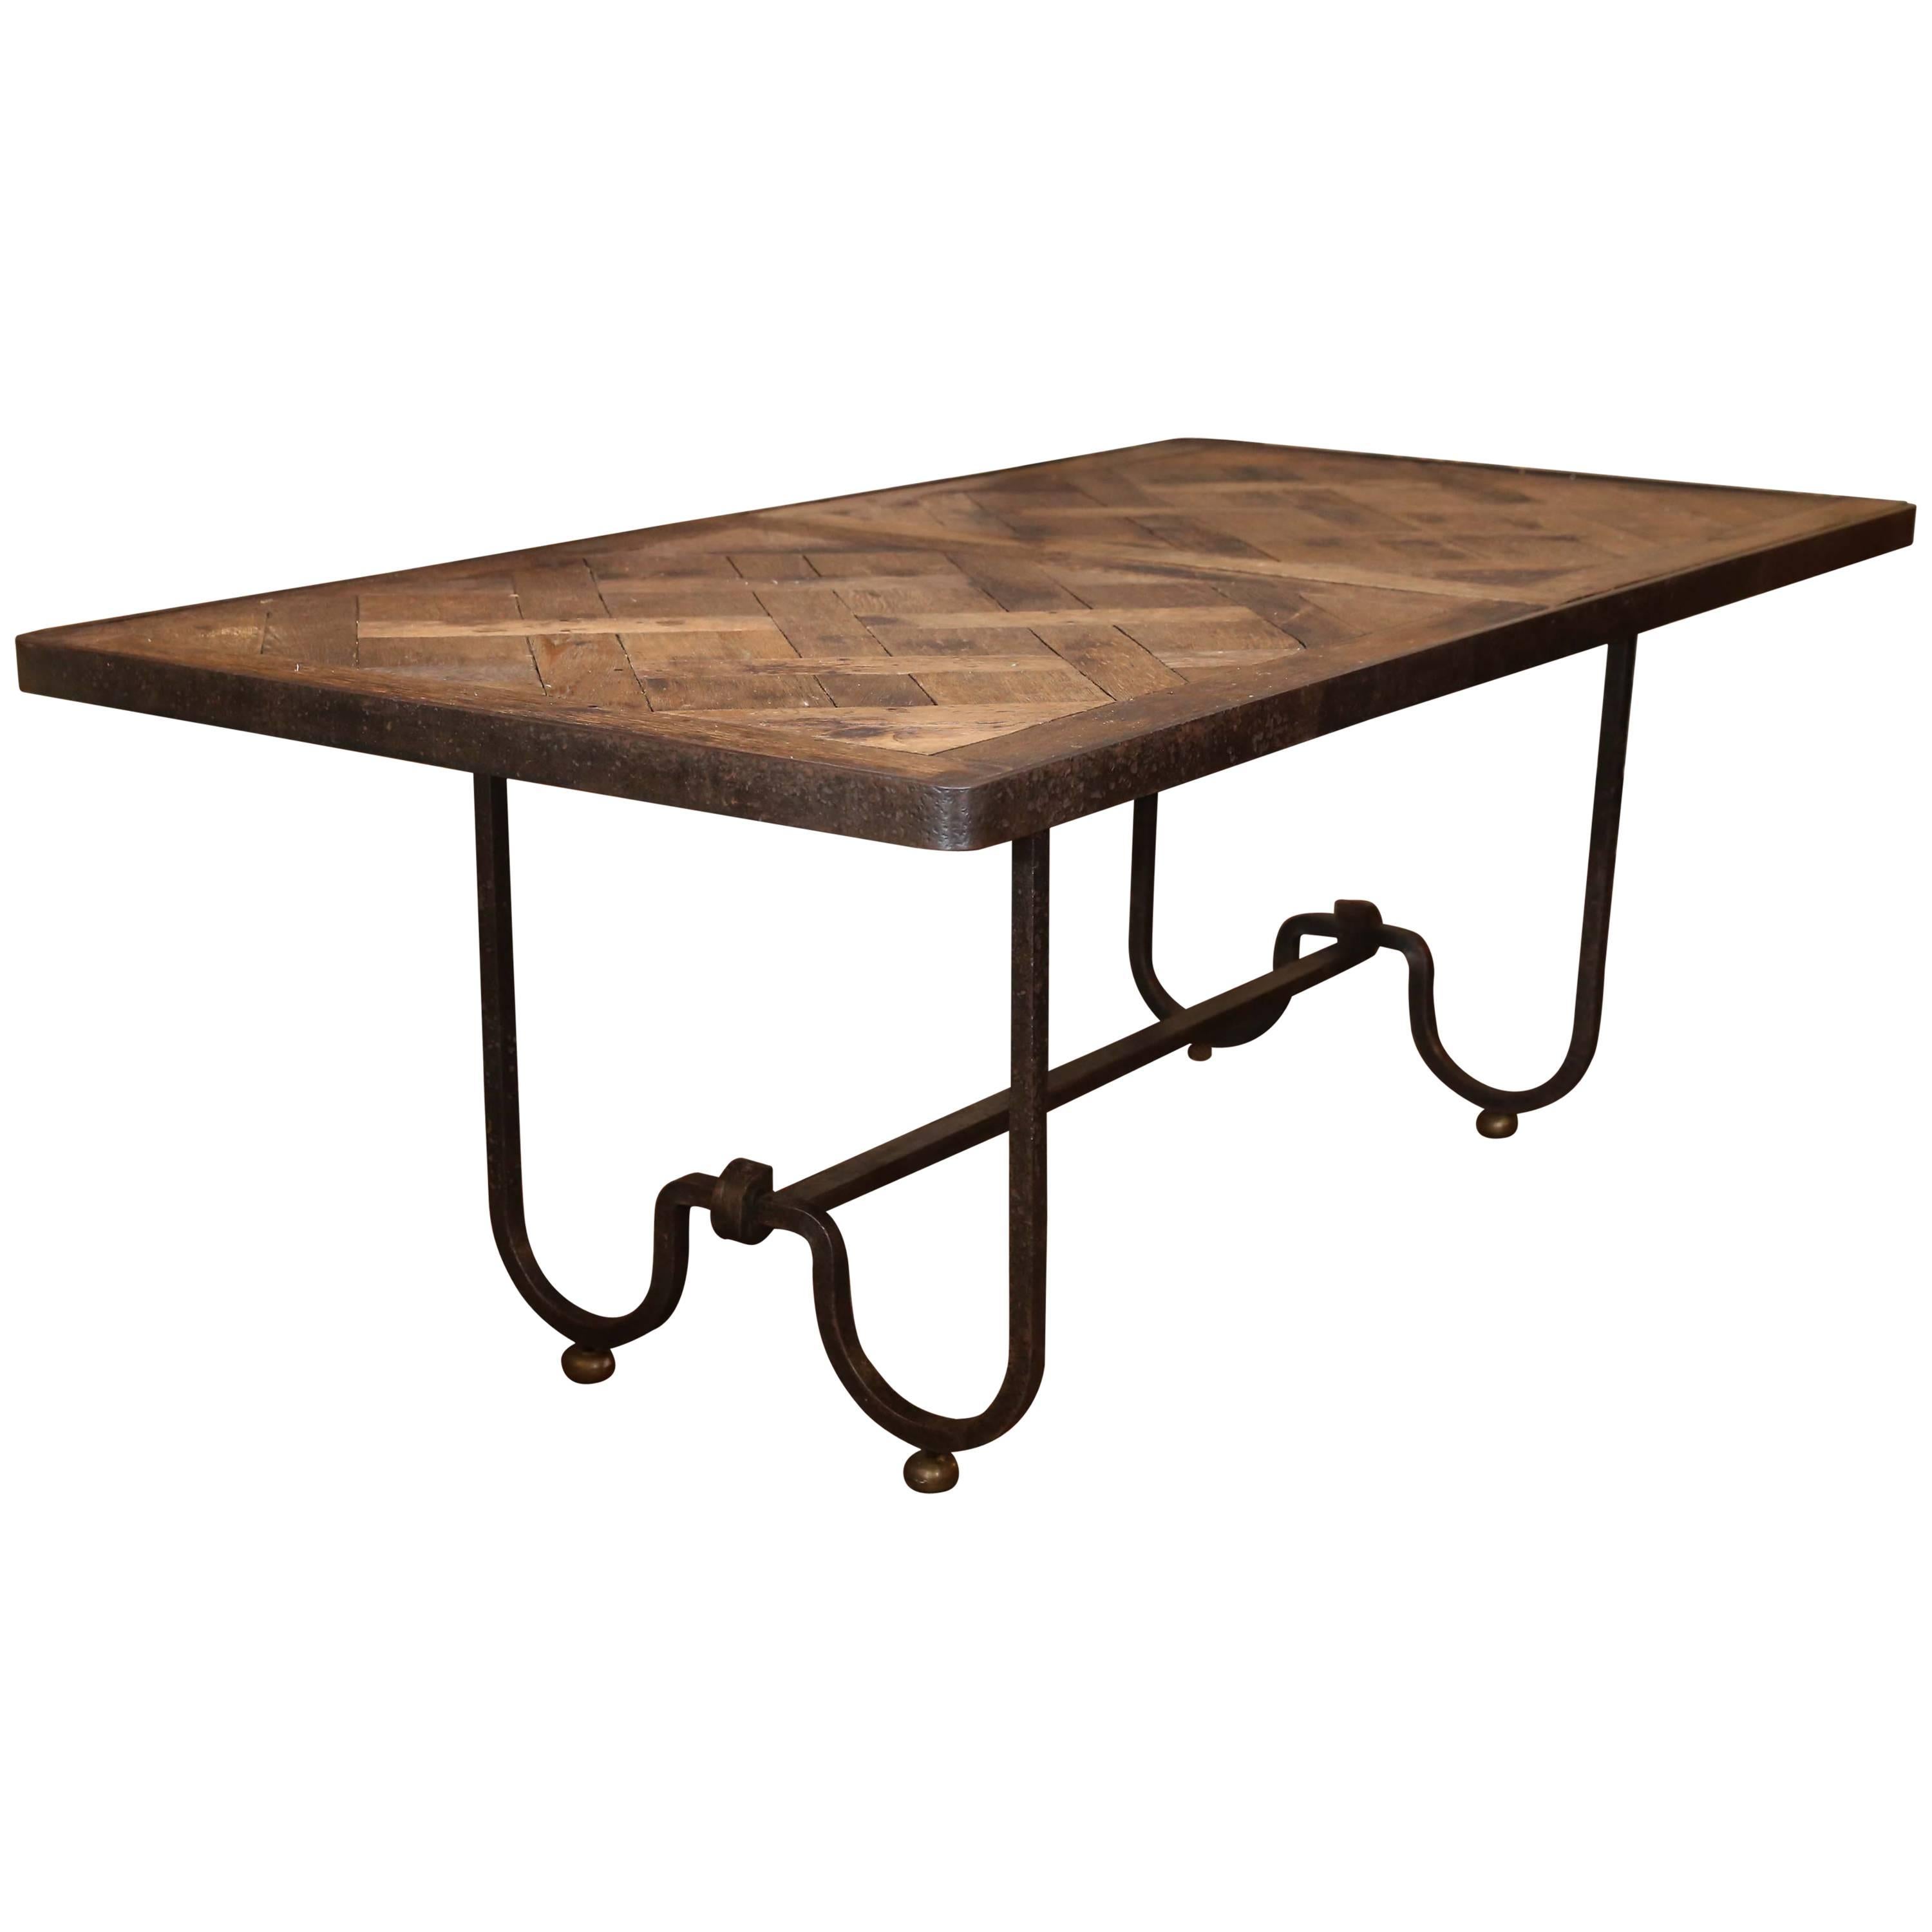 Wrought Iron Table Base with an Inset De Versailes For Sale